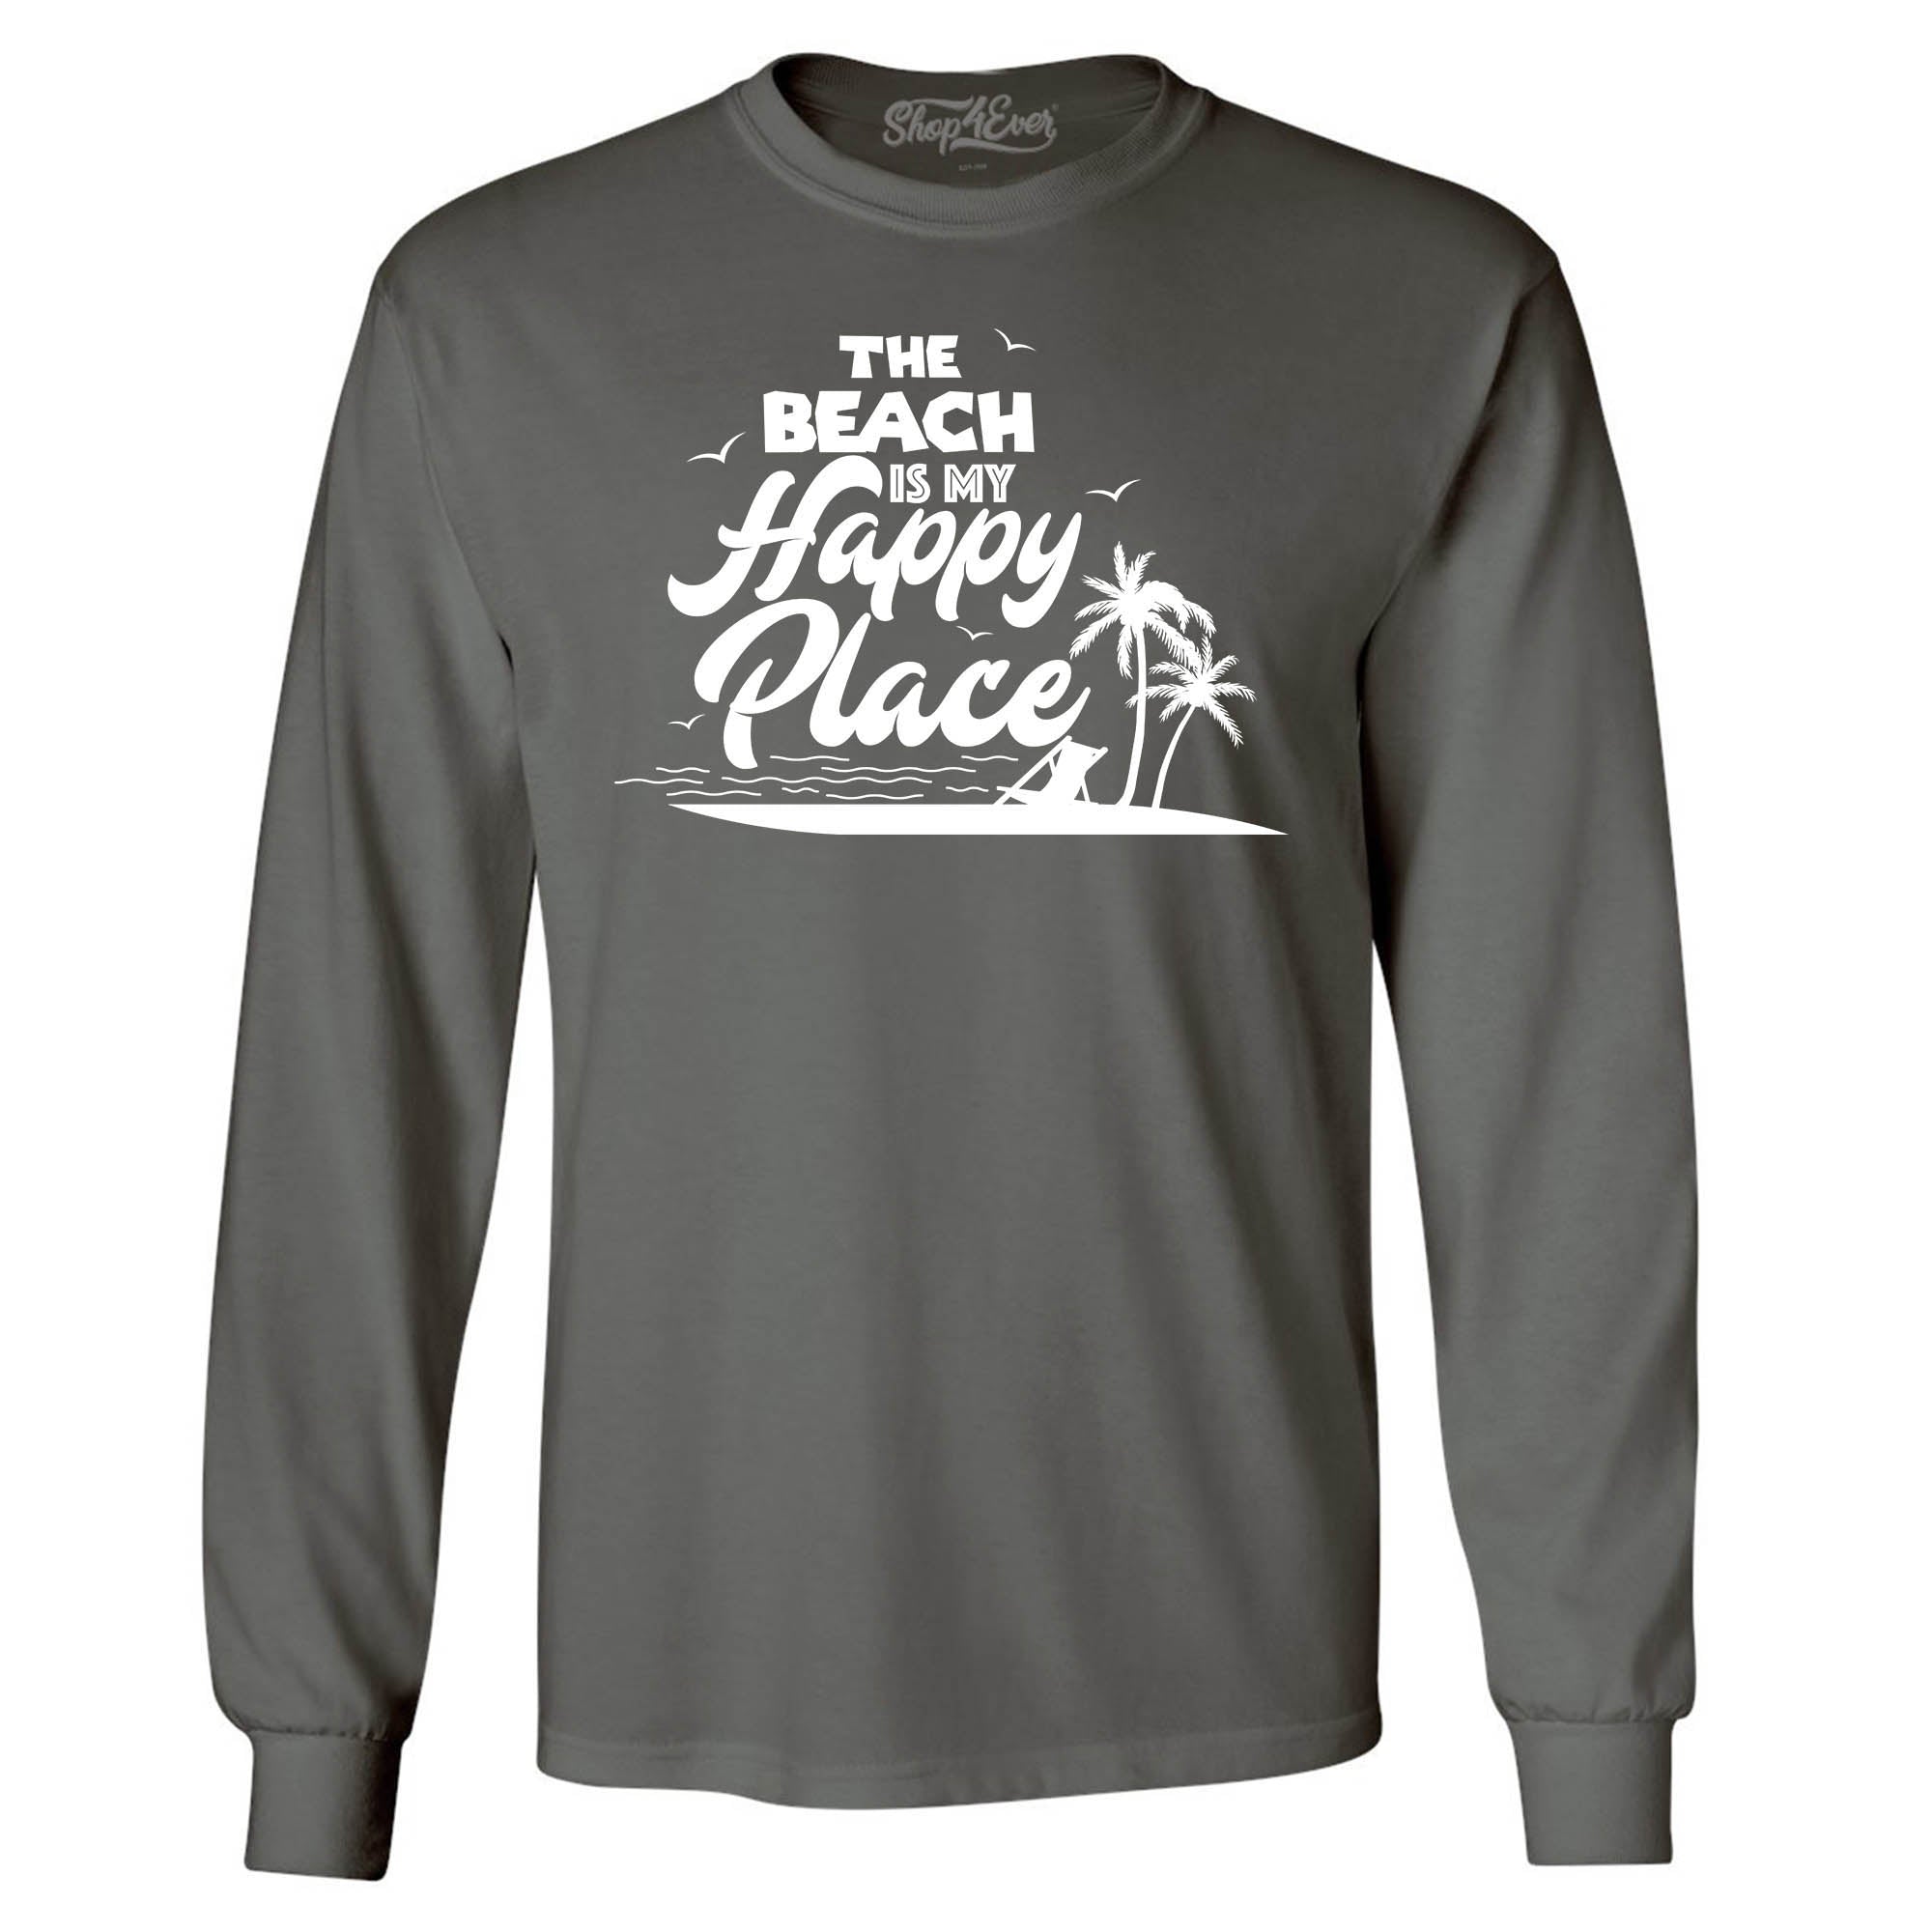 The Beach is My Happy Place Men's Long Sleeve Shirt